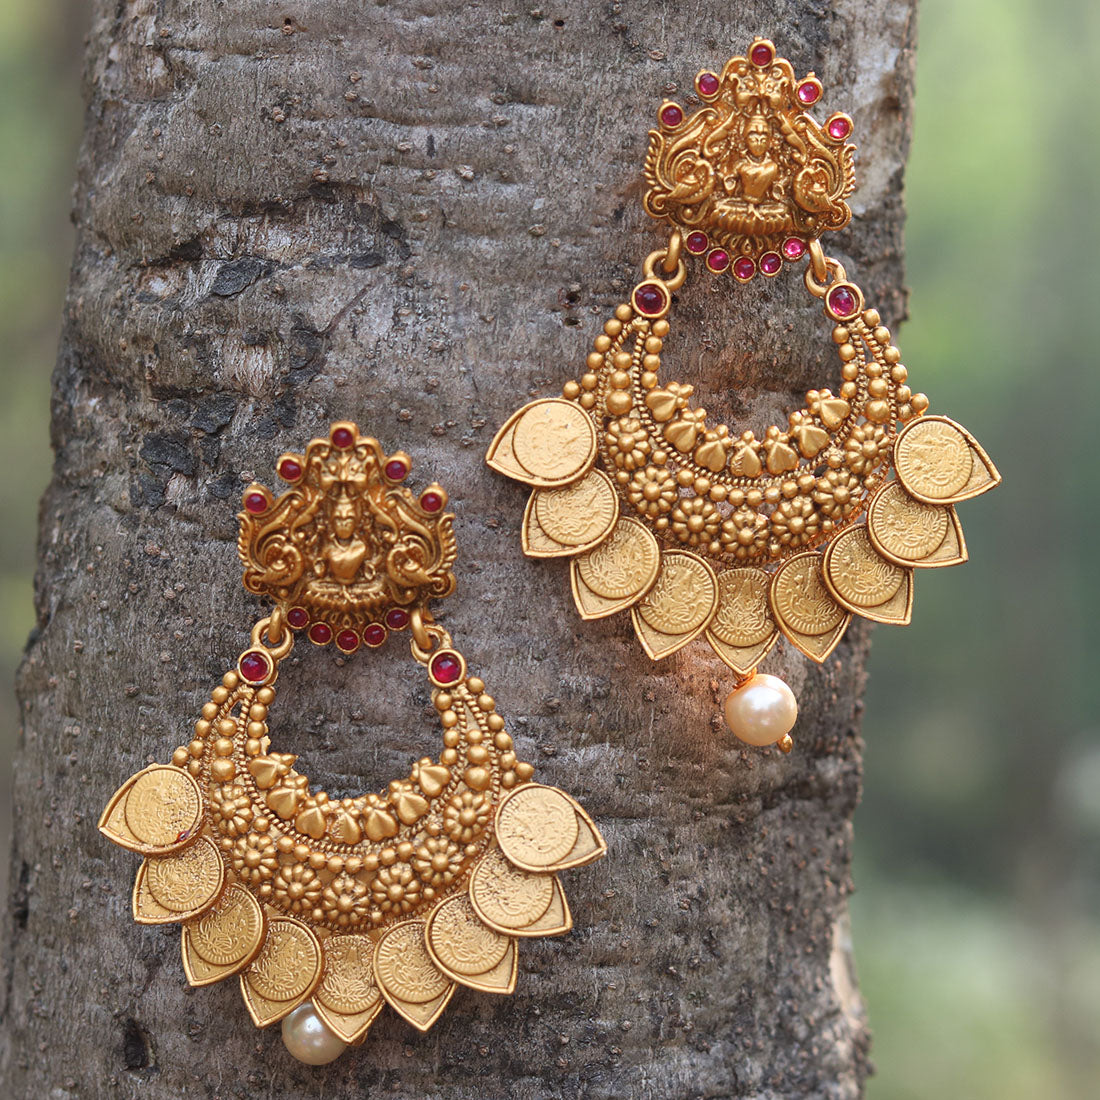 South Indian Gold Jewellery | Jewellery Online - Pothys Swarna Mahal